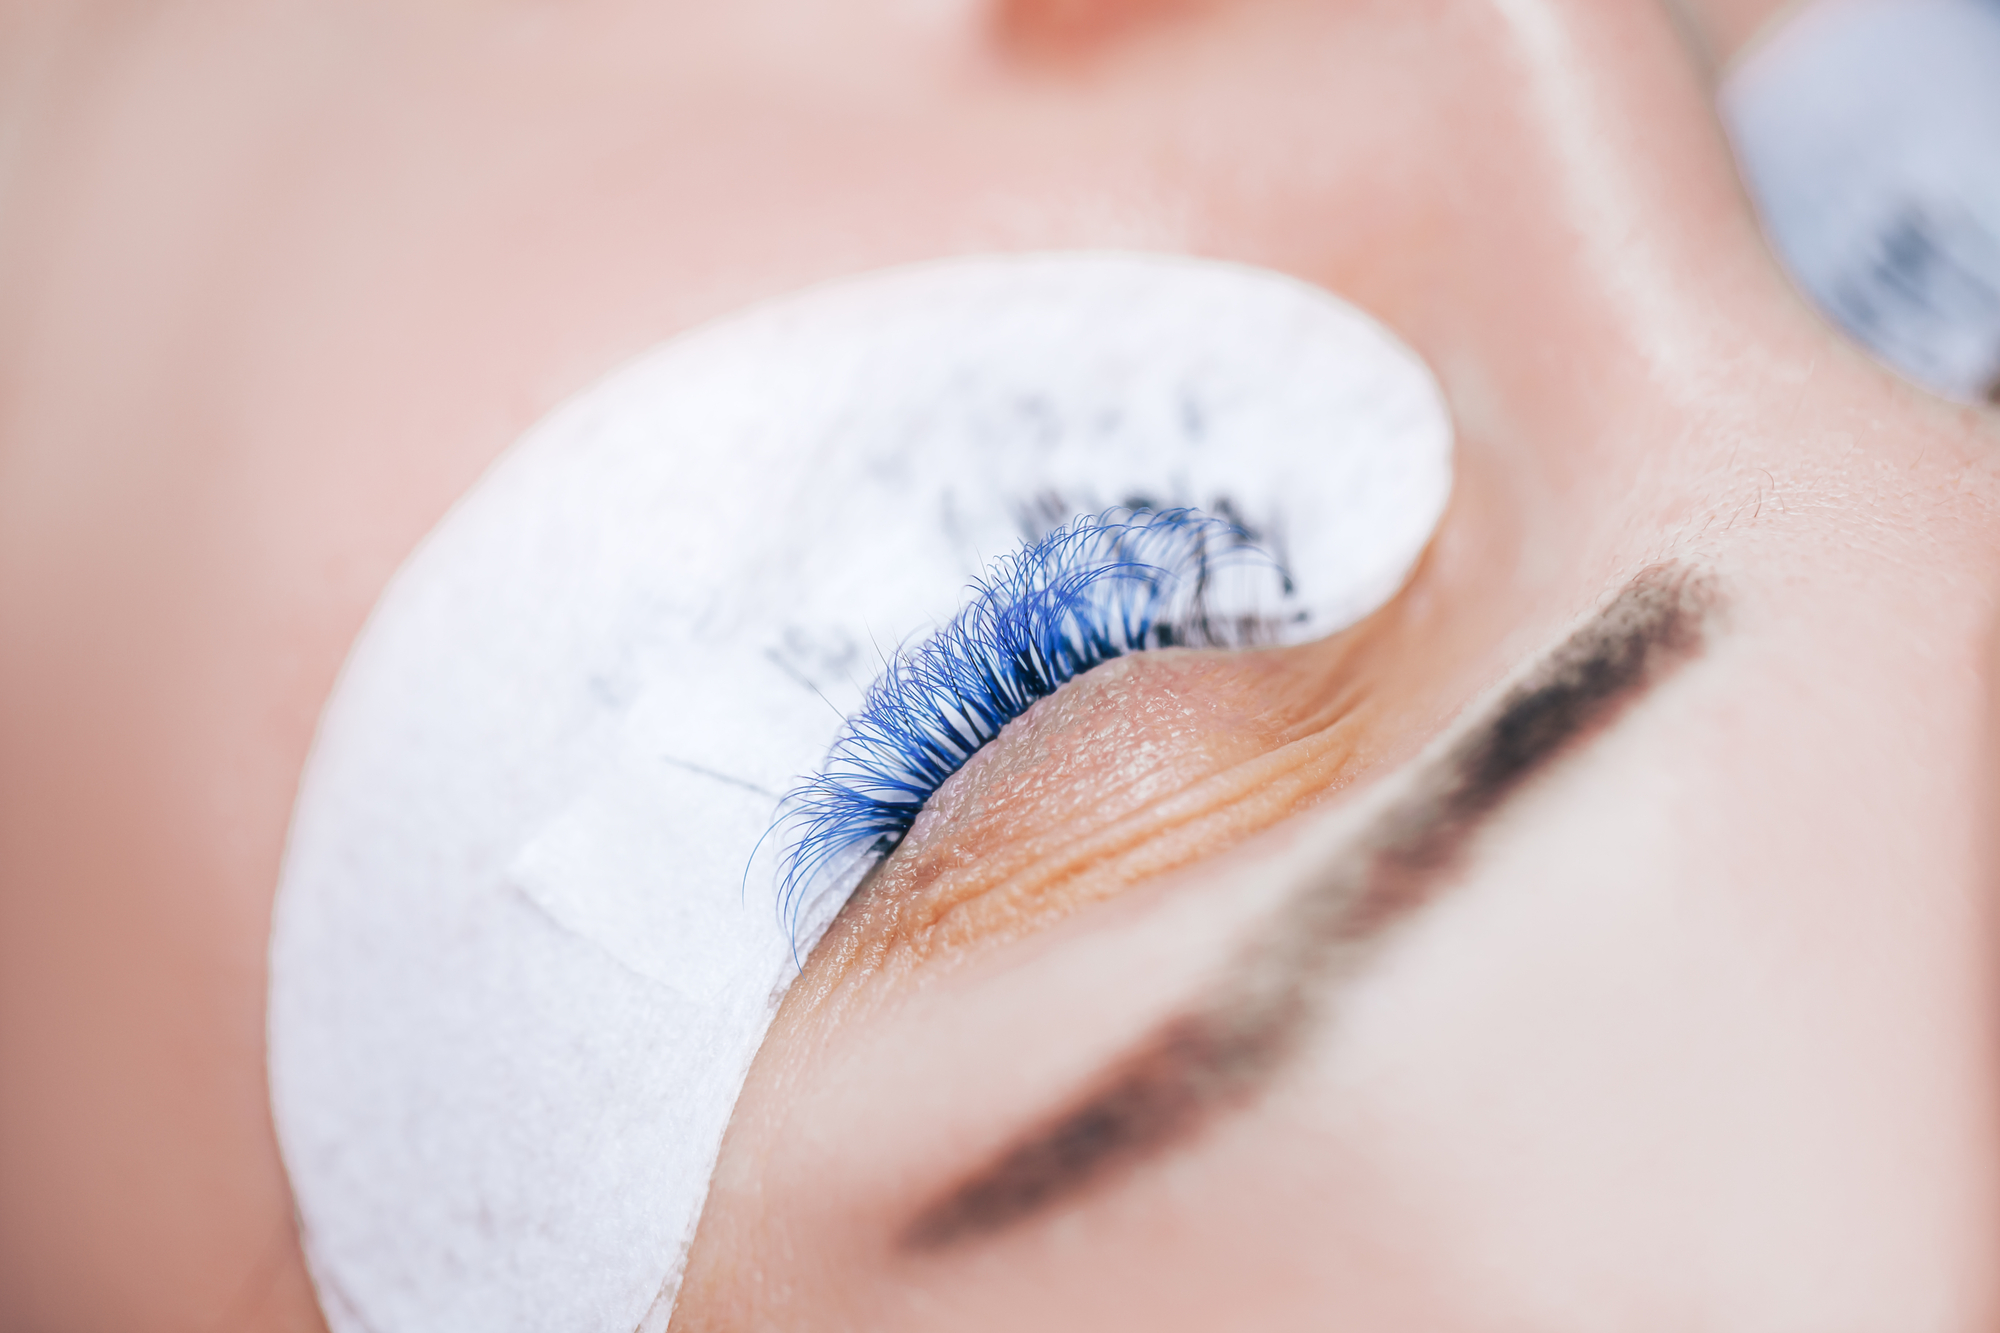 Removing Eyelash Extensions with coconut oil